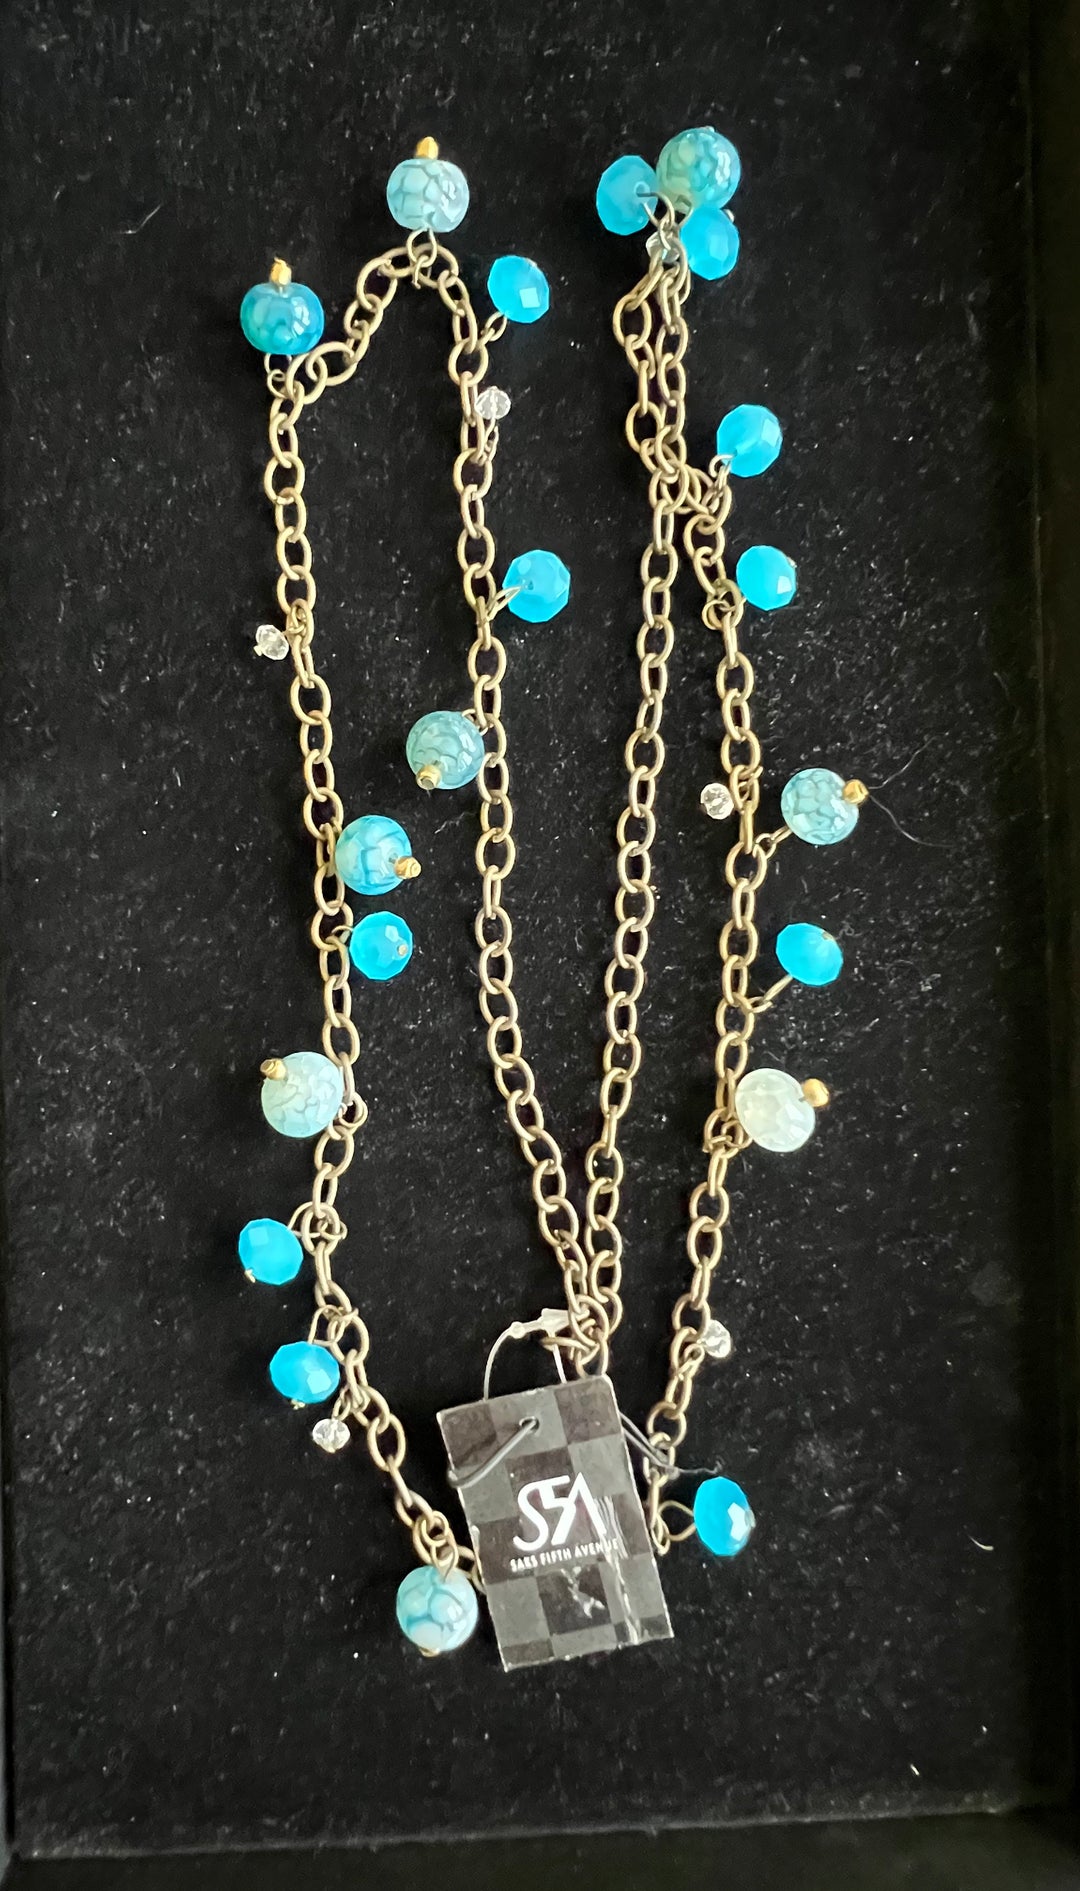 36” Long Gemstone and Gunmetal Chain Saks Fifth Avenue Necklace with original tags